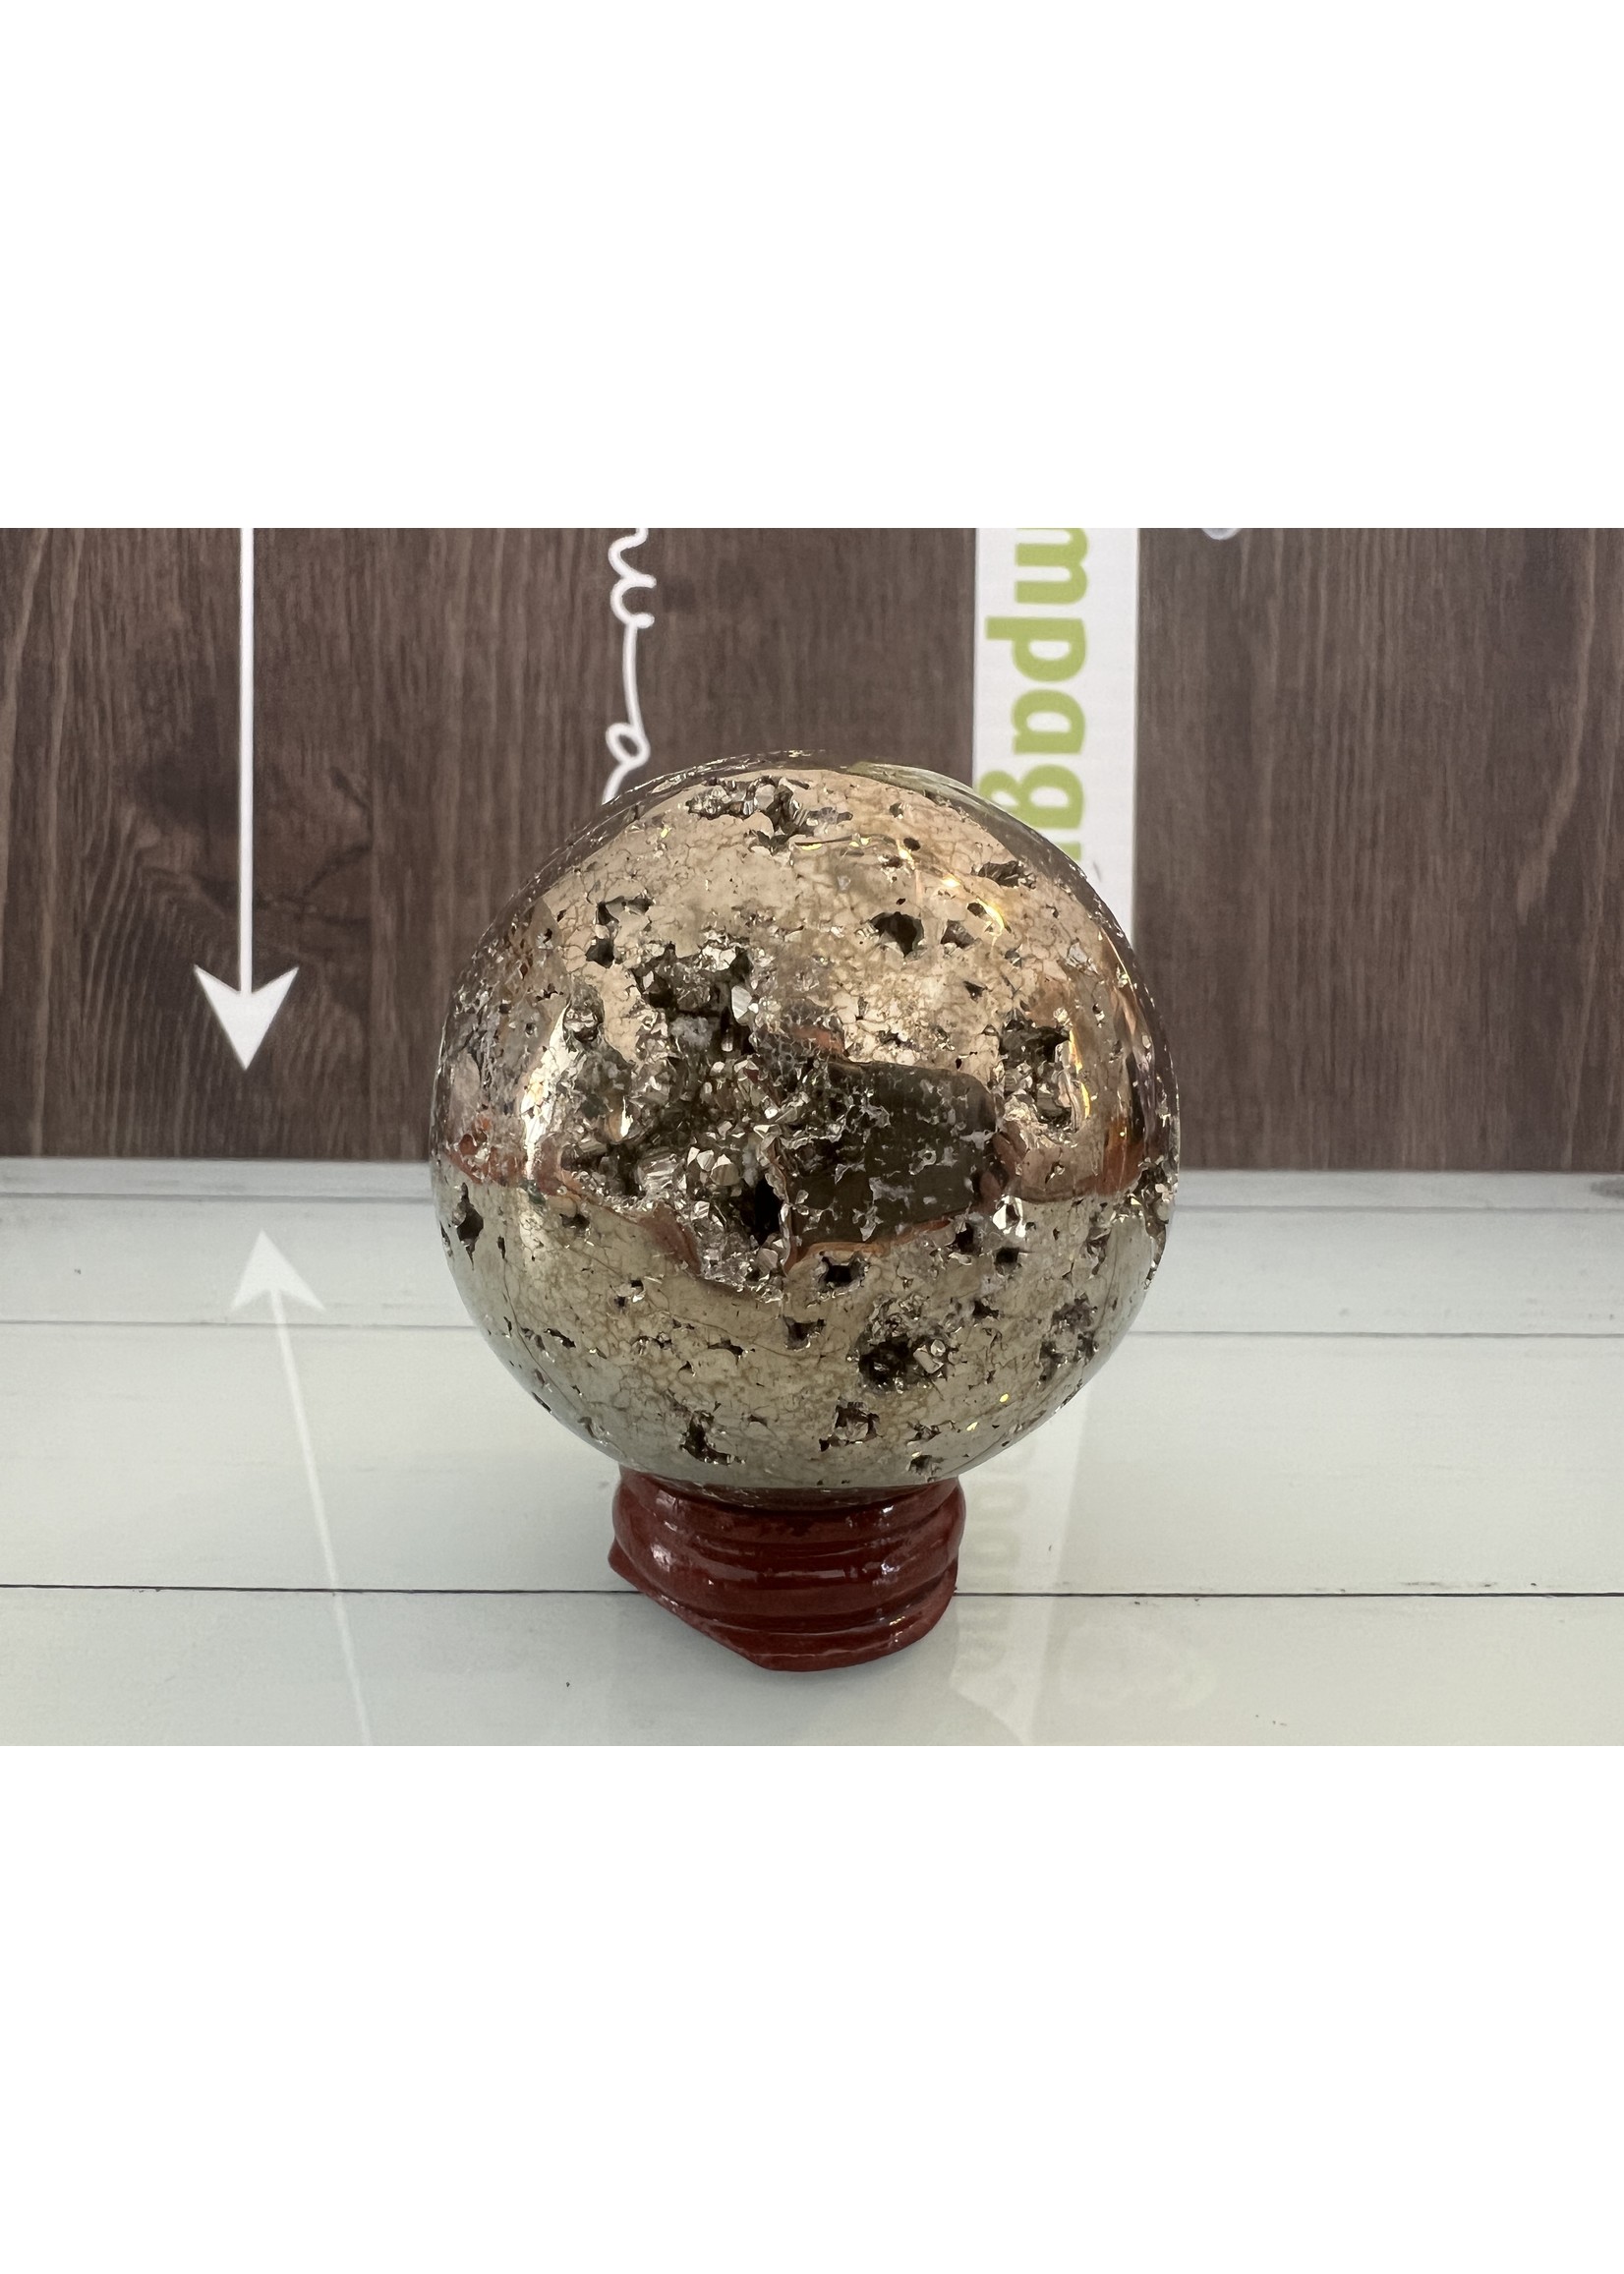 sparkling pyrite ball,  brings strength, vitality, dynamism, creativity, magnetic shield